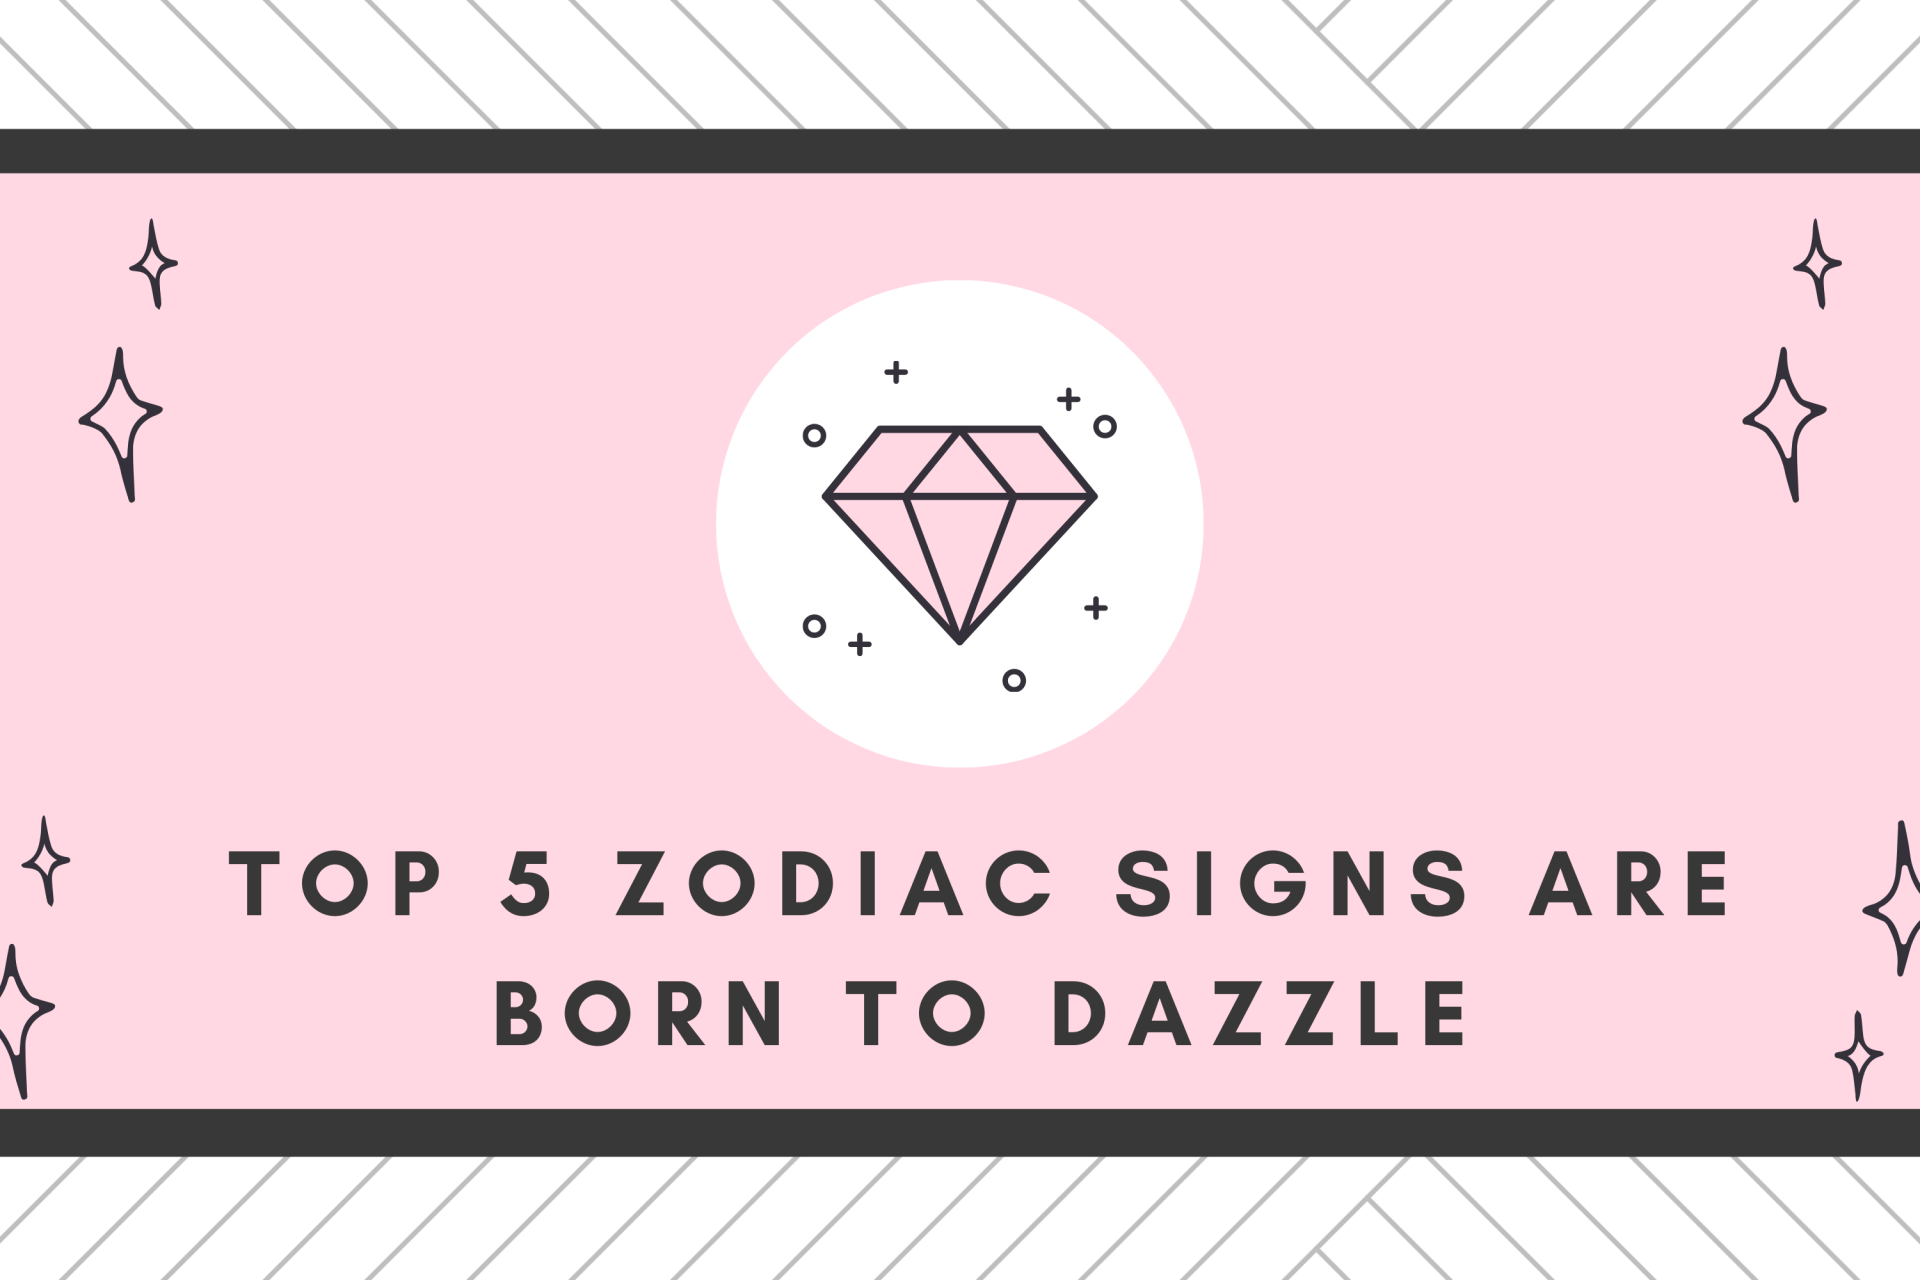 Top 5 Zodiac Signs Are Born To Dazzle According To Astrology